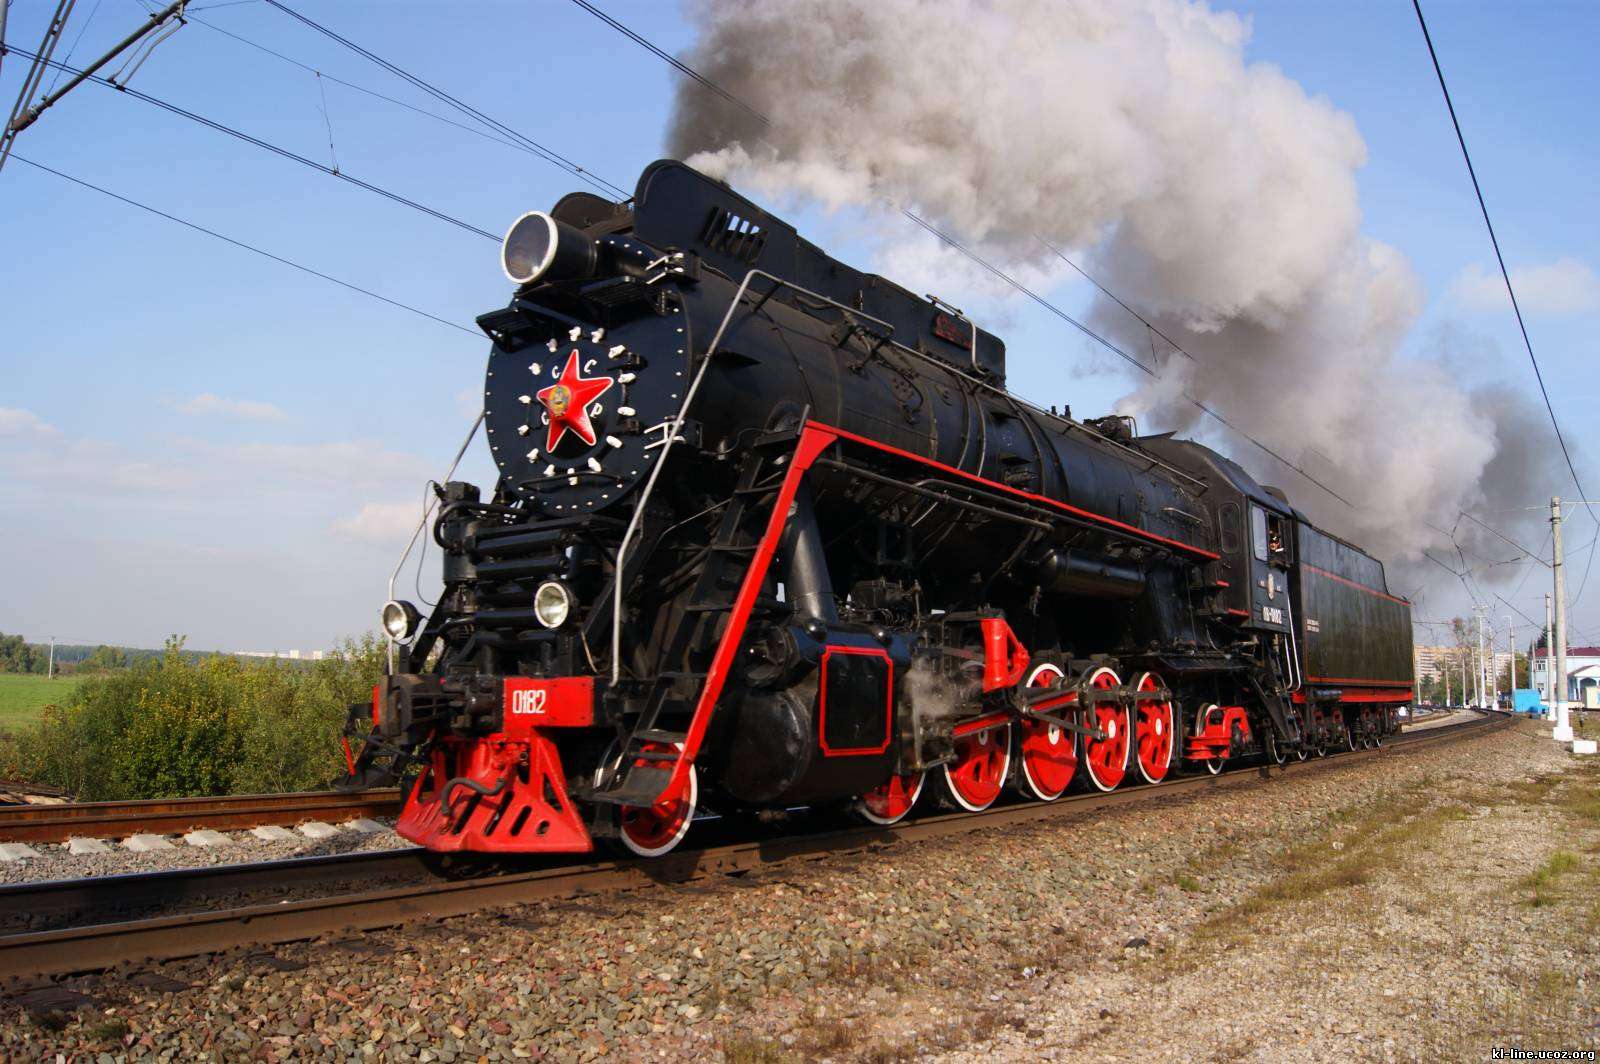 locomotive LV-0182 puzzle online from photo